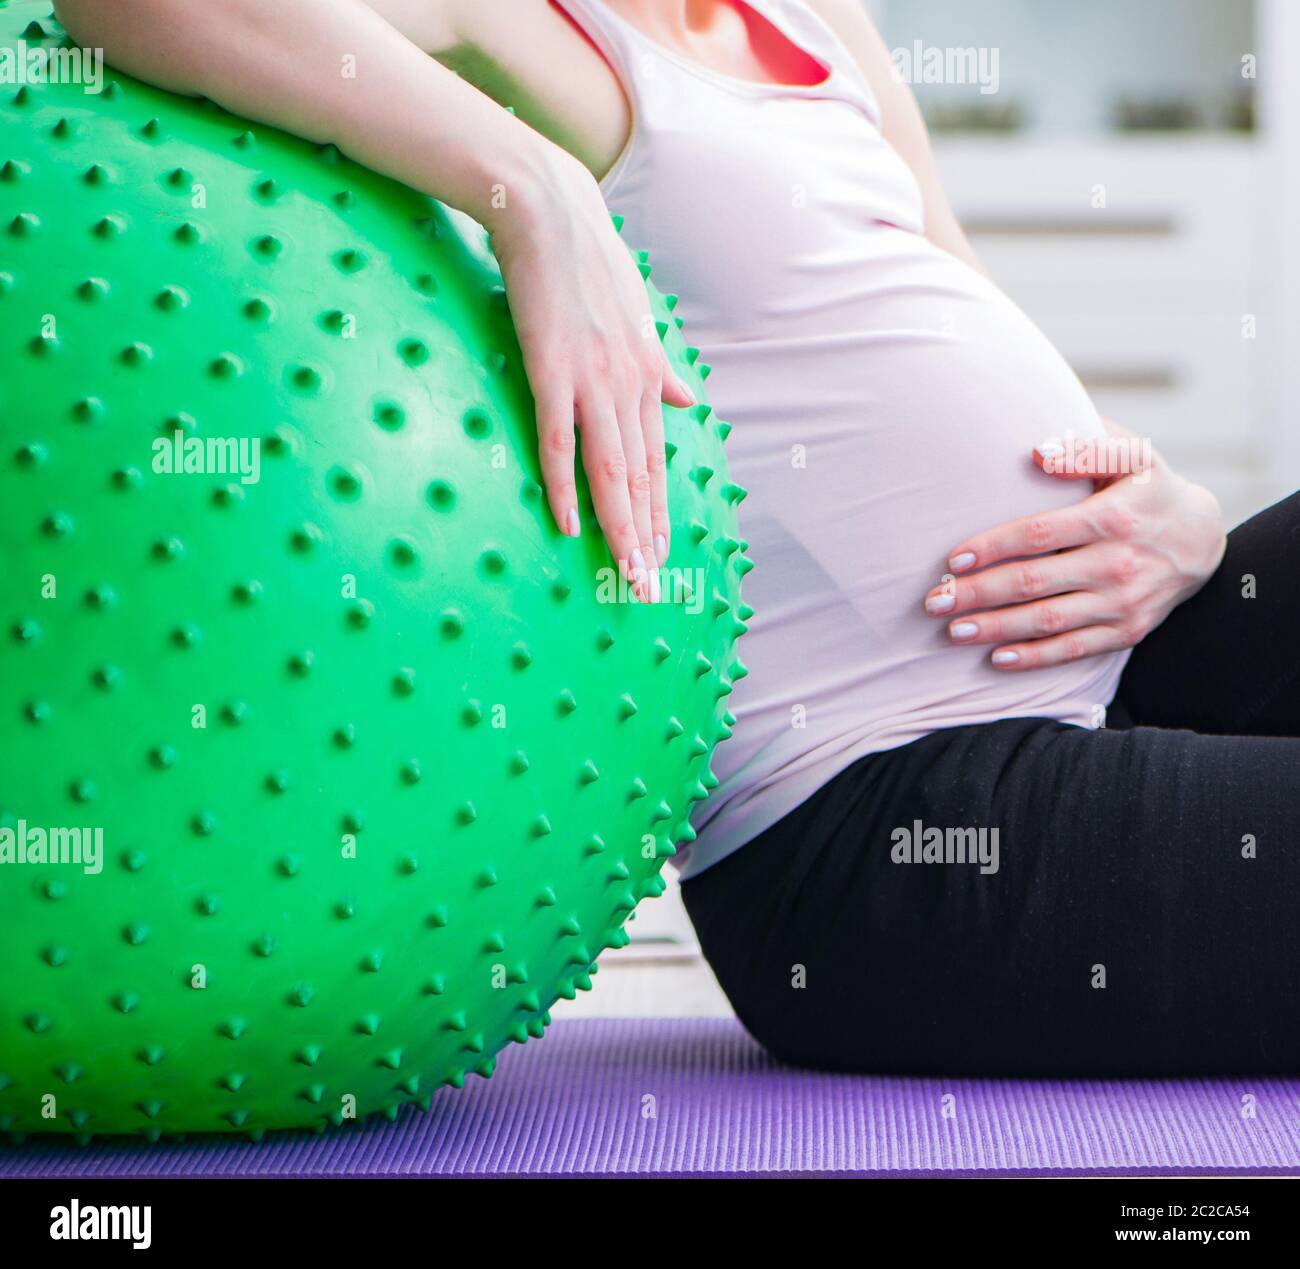 Pregnant woman exercising in anticipation of child birth Stock Photo